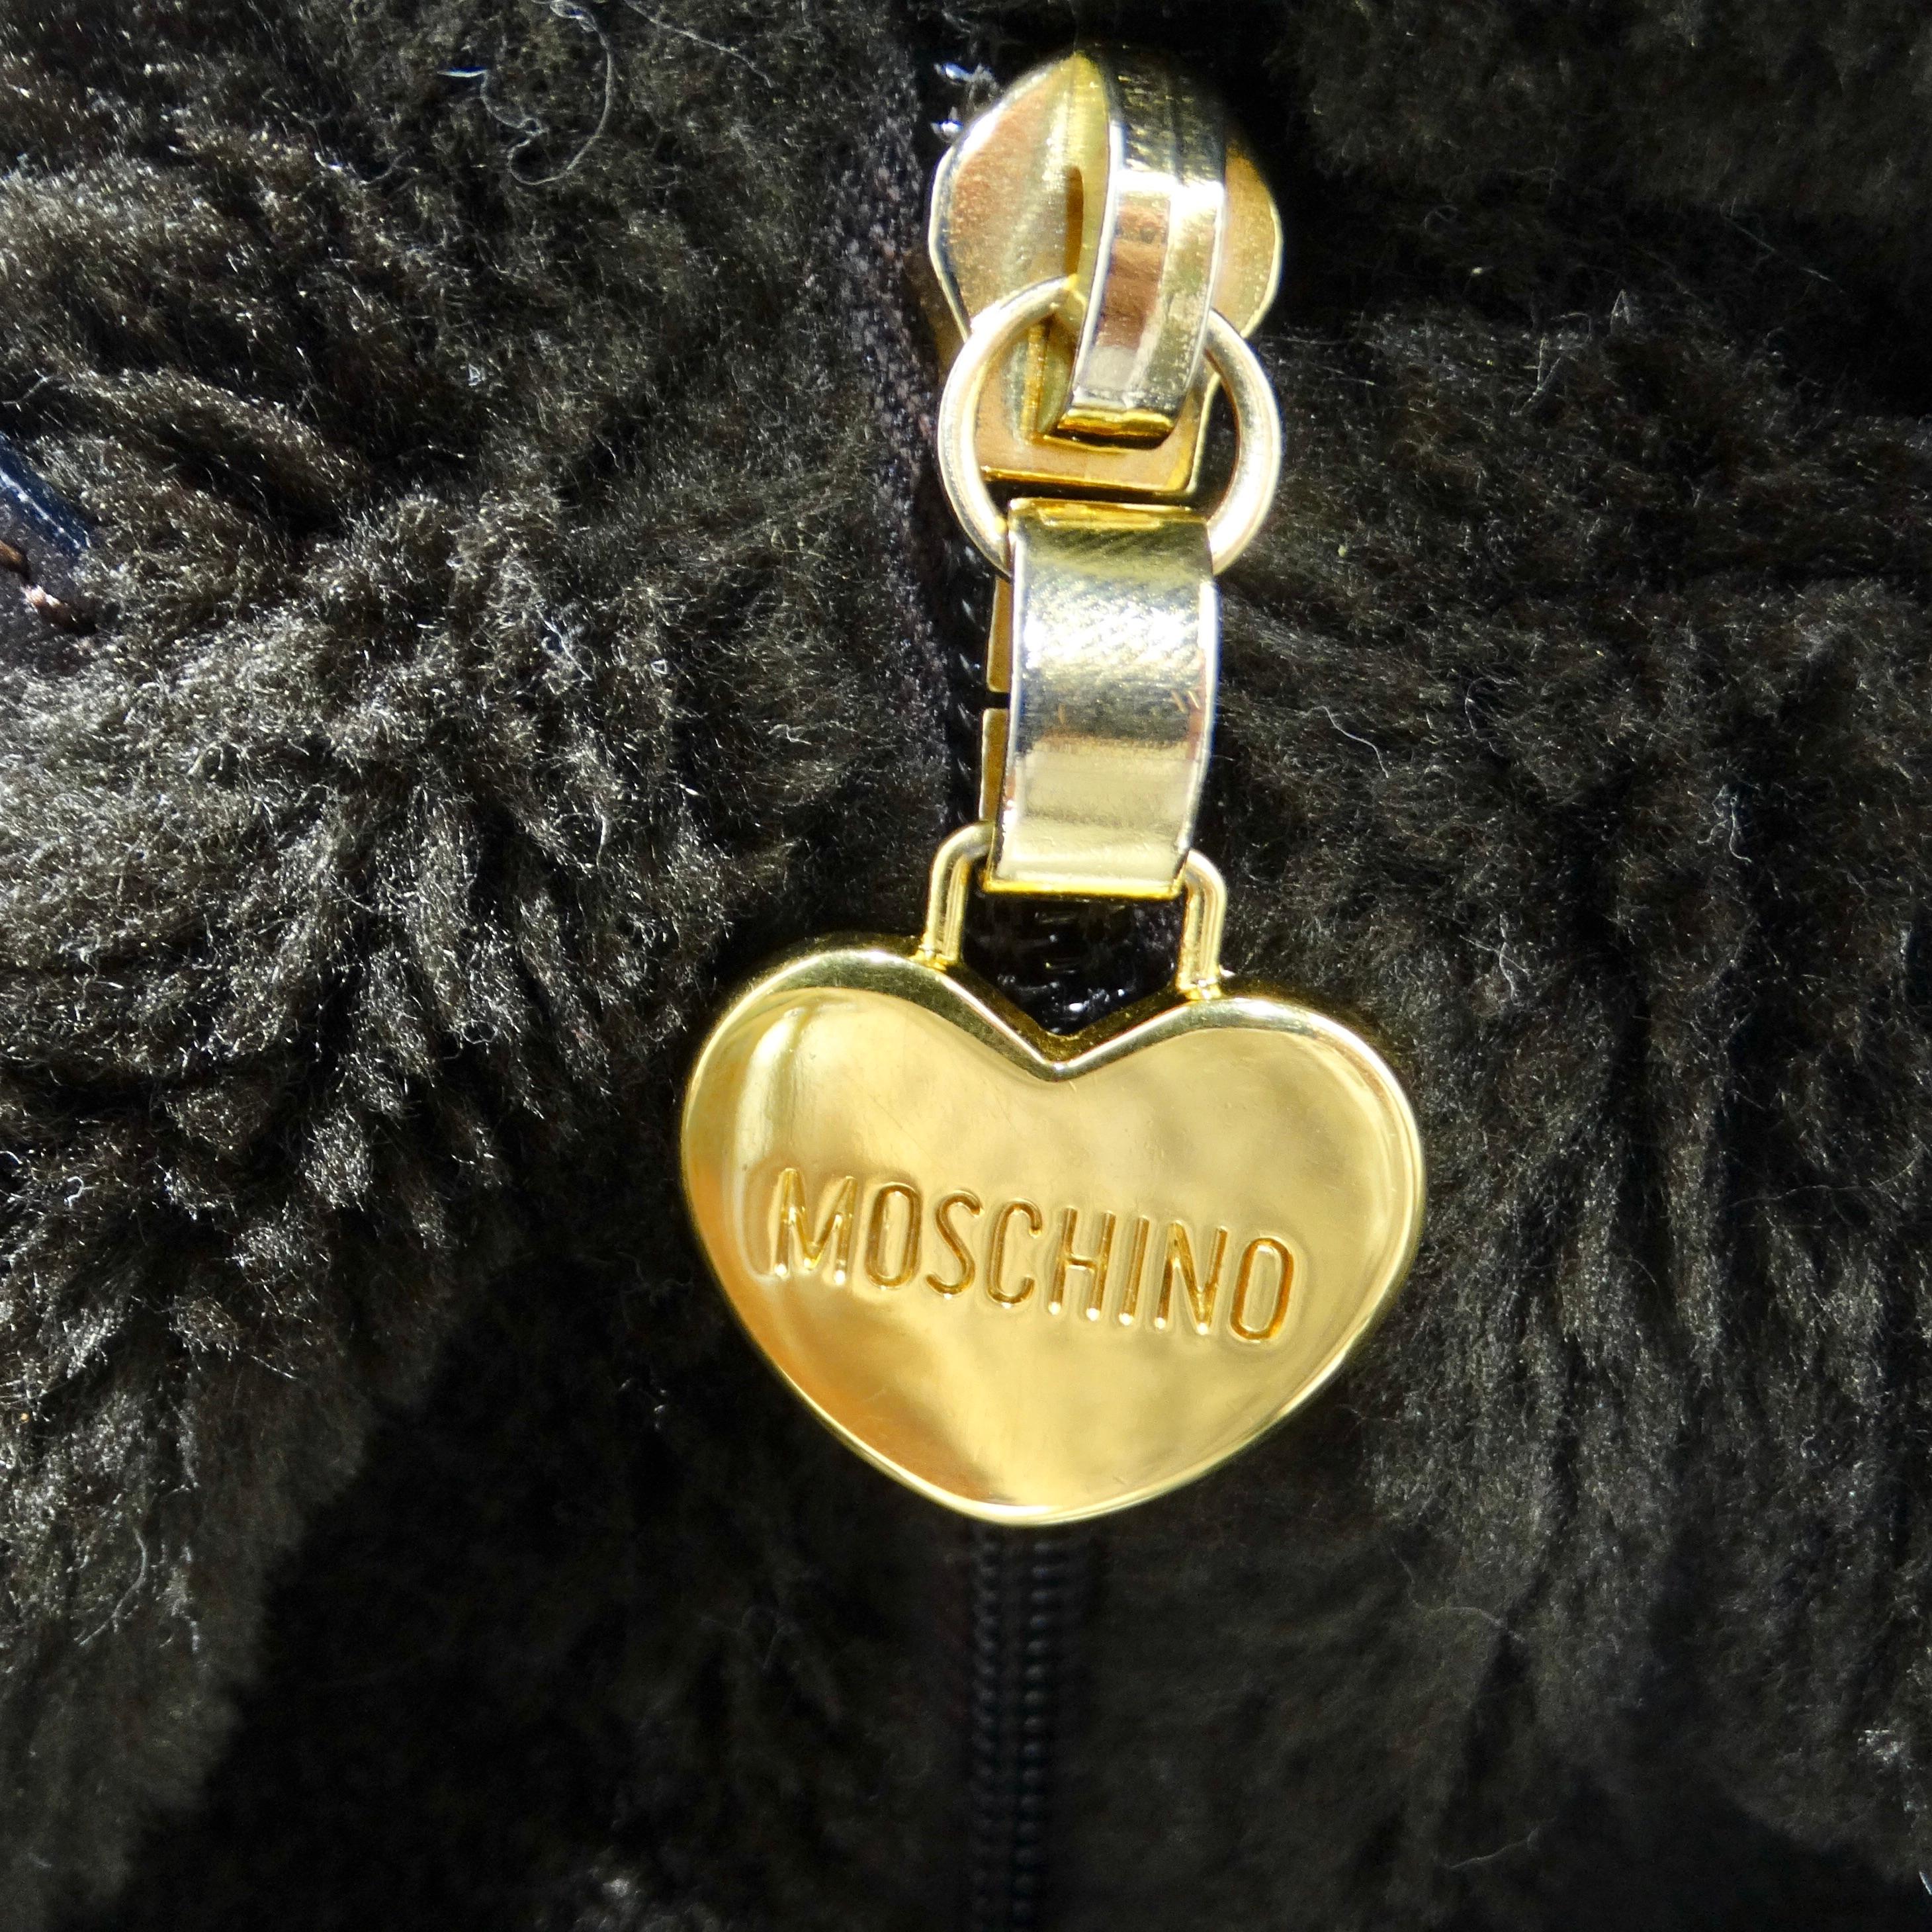 Moschino Redwall 1990s Teddy Bear Backpack For Sale 1